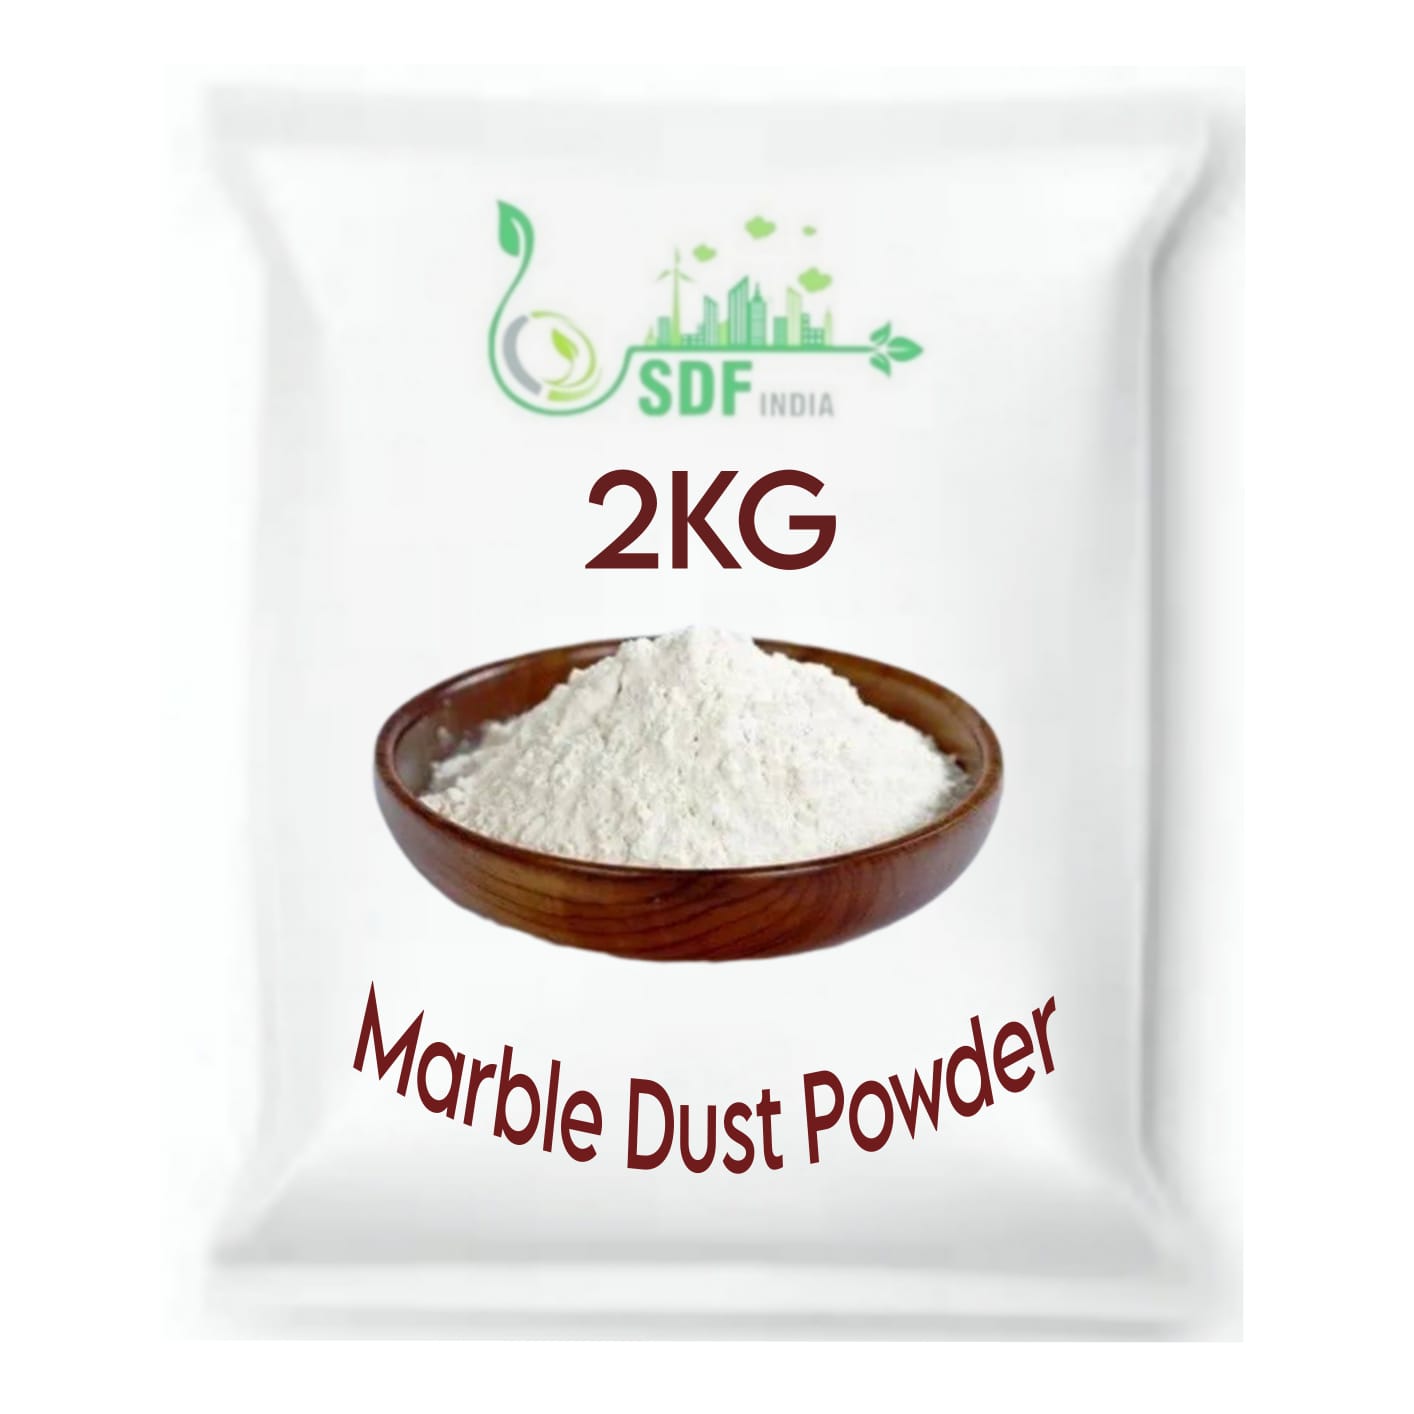 SDF INDIA Marble dust, White Marble Powder for Mural Art, Relief Painting, Raised Art, Persian Art, DIY, Gift for Artists, Students, Children & for All Arts (2KG)